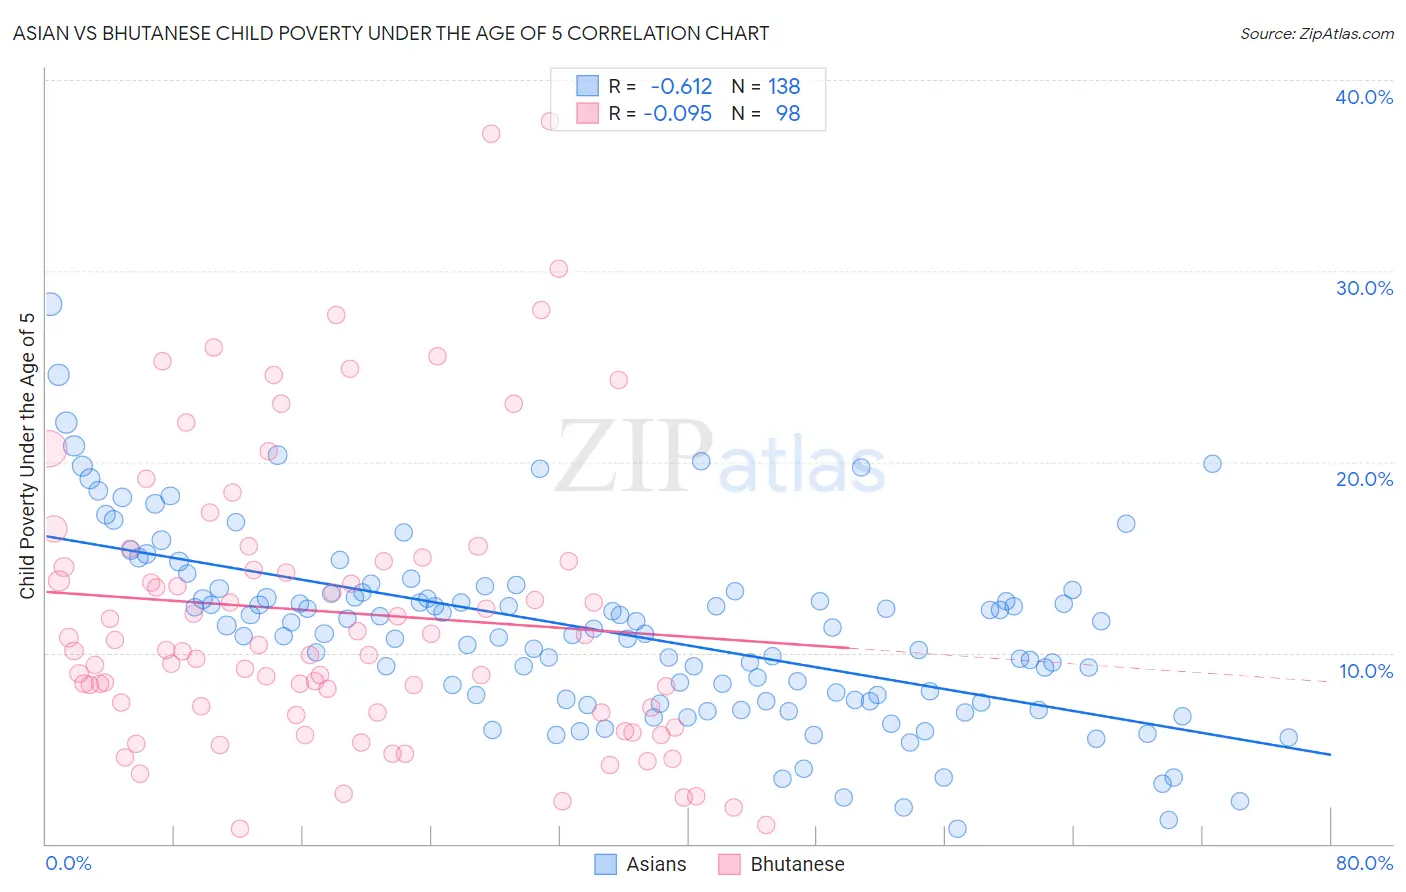 Asian vs Bhutanese Child Poverty Under the Age of 5